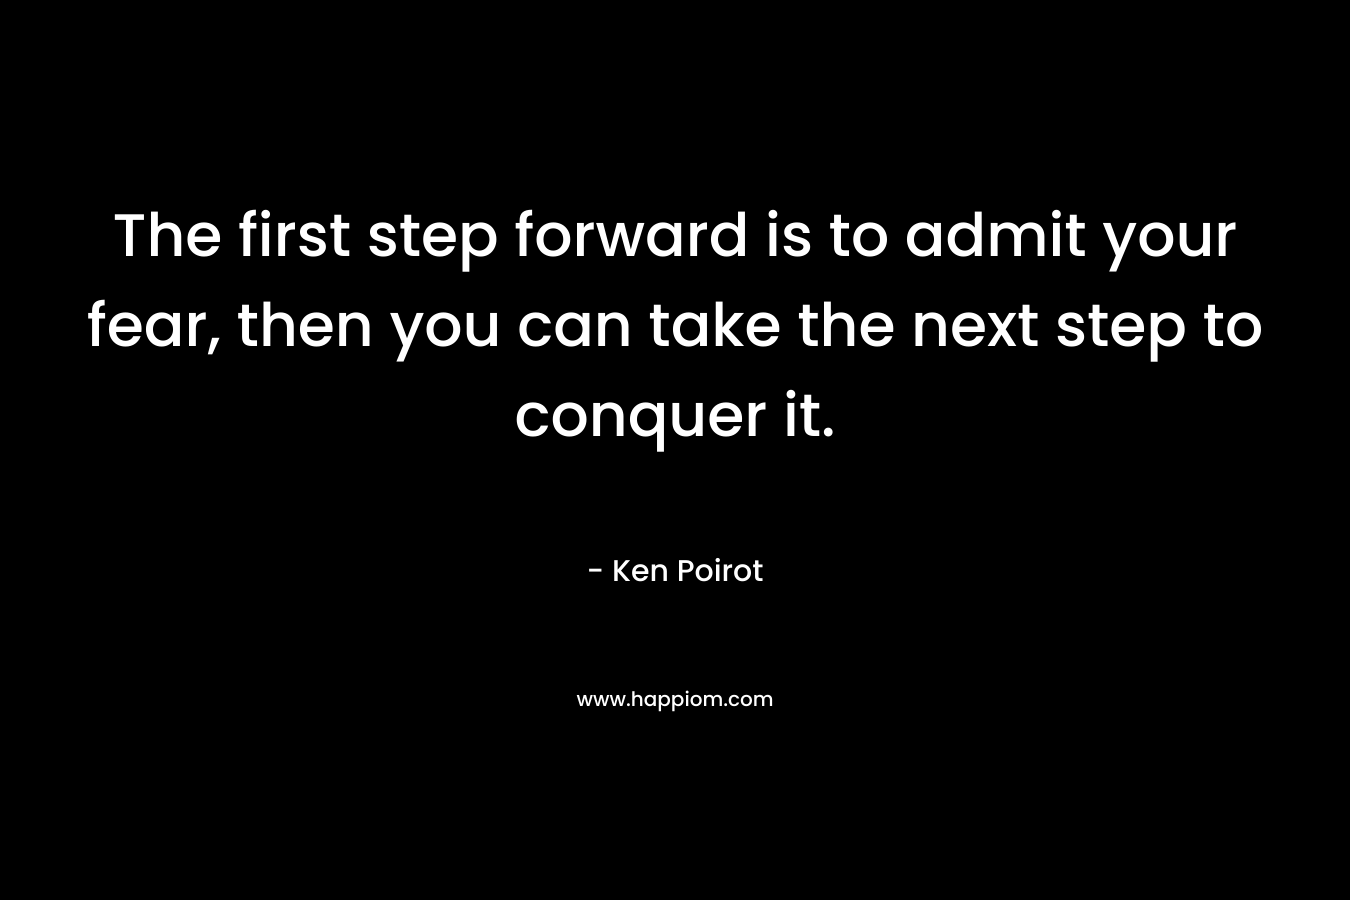 The first step forward is to admit your fear, then you can take the next step to conquer it.